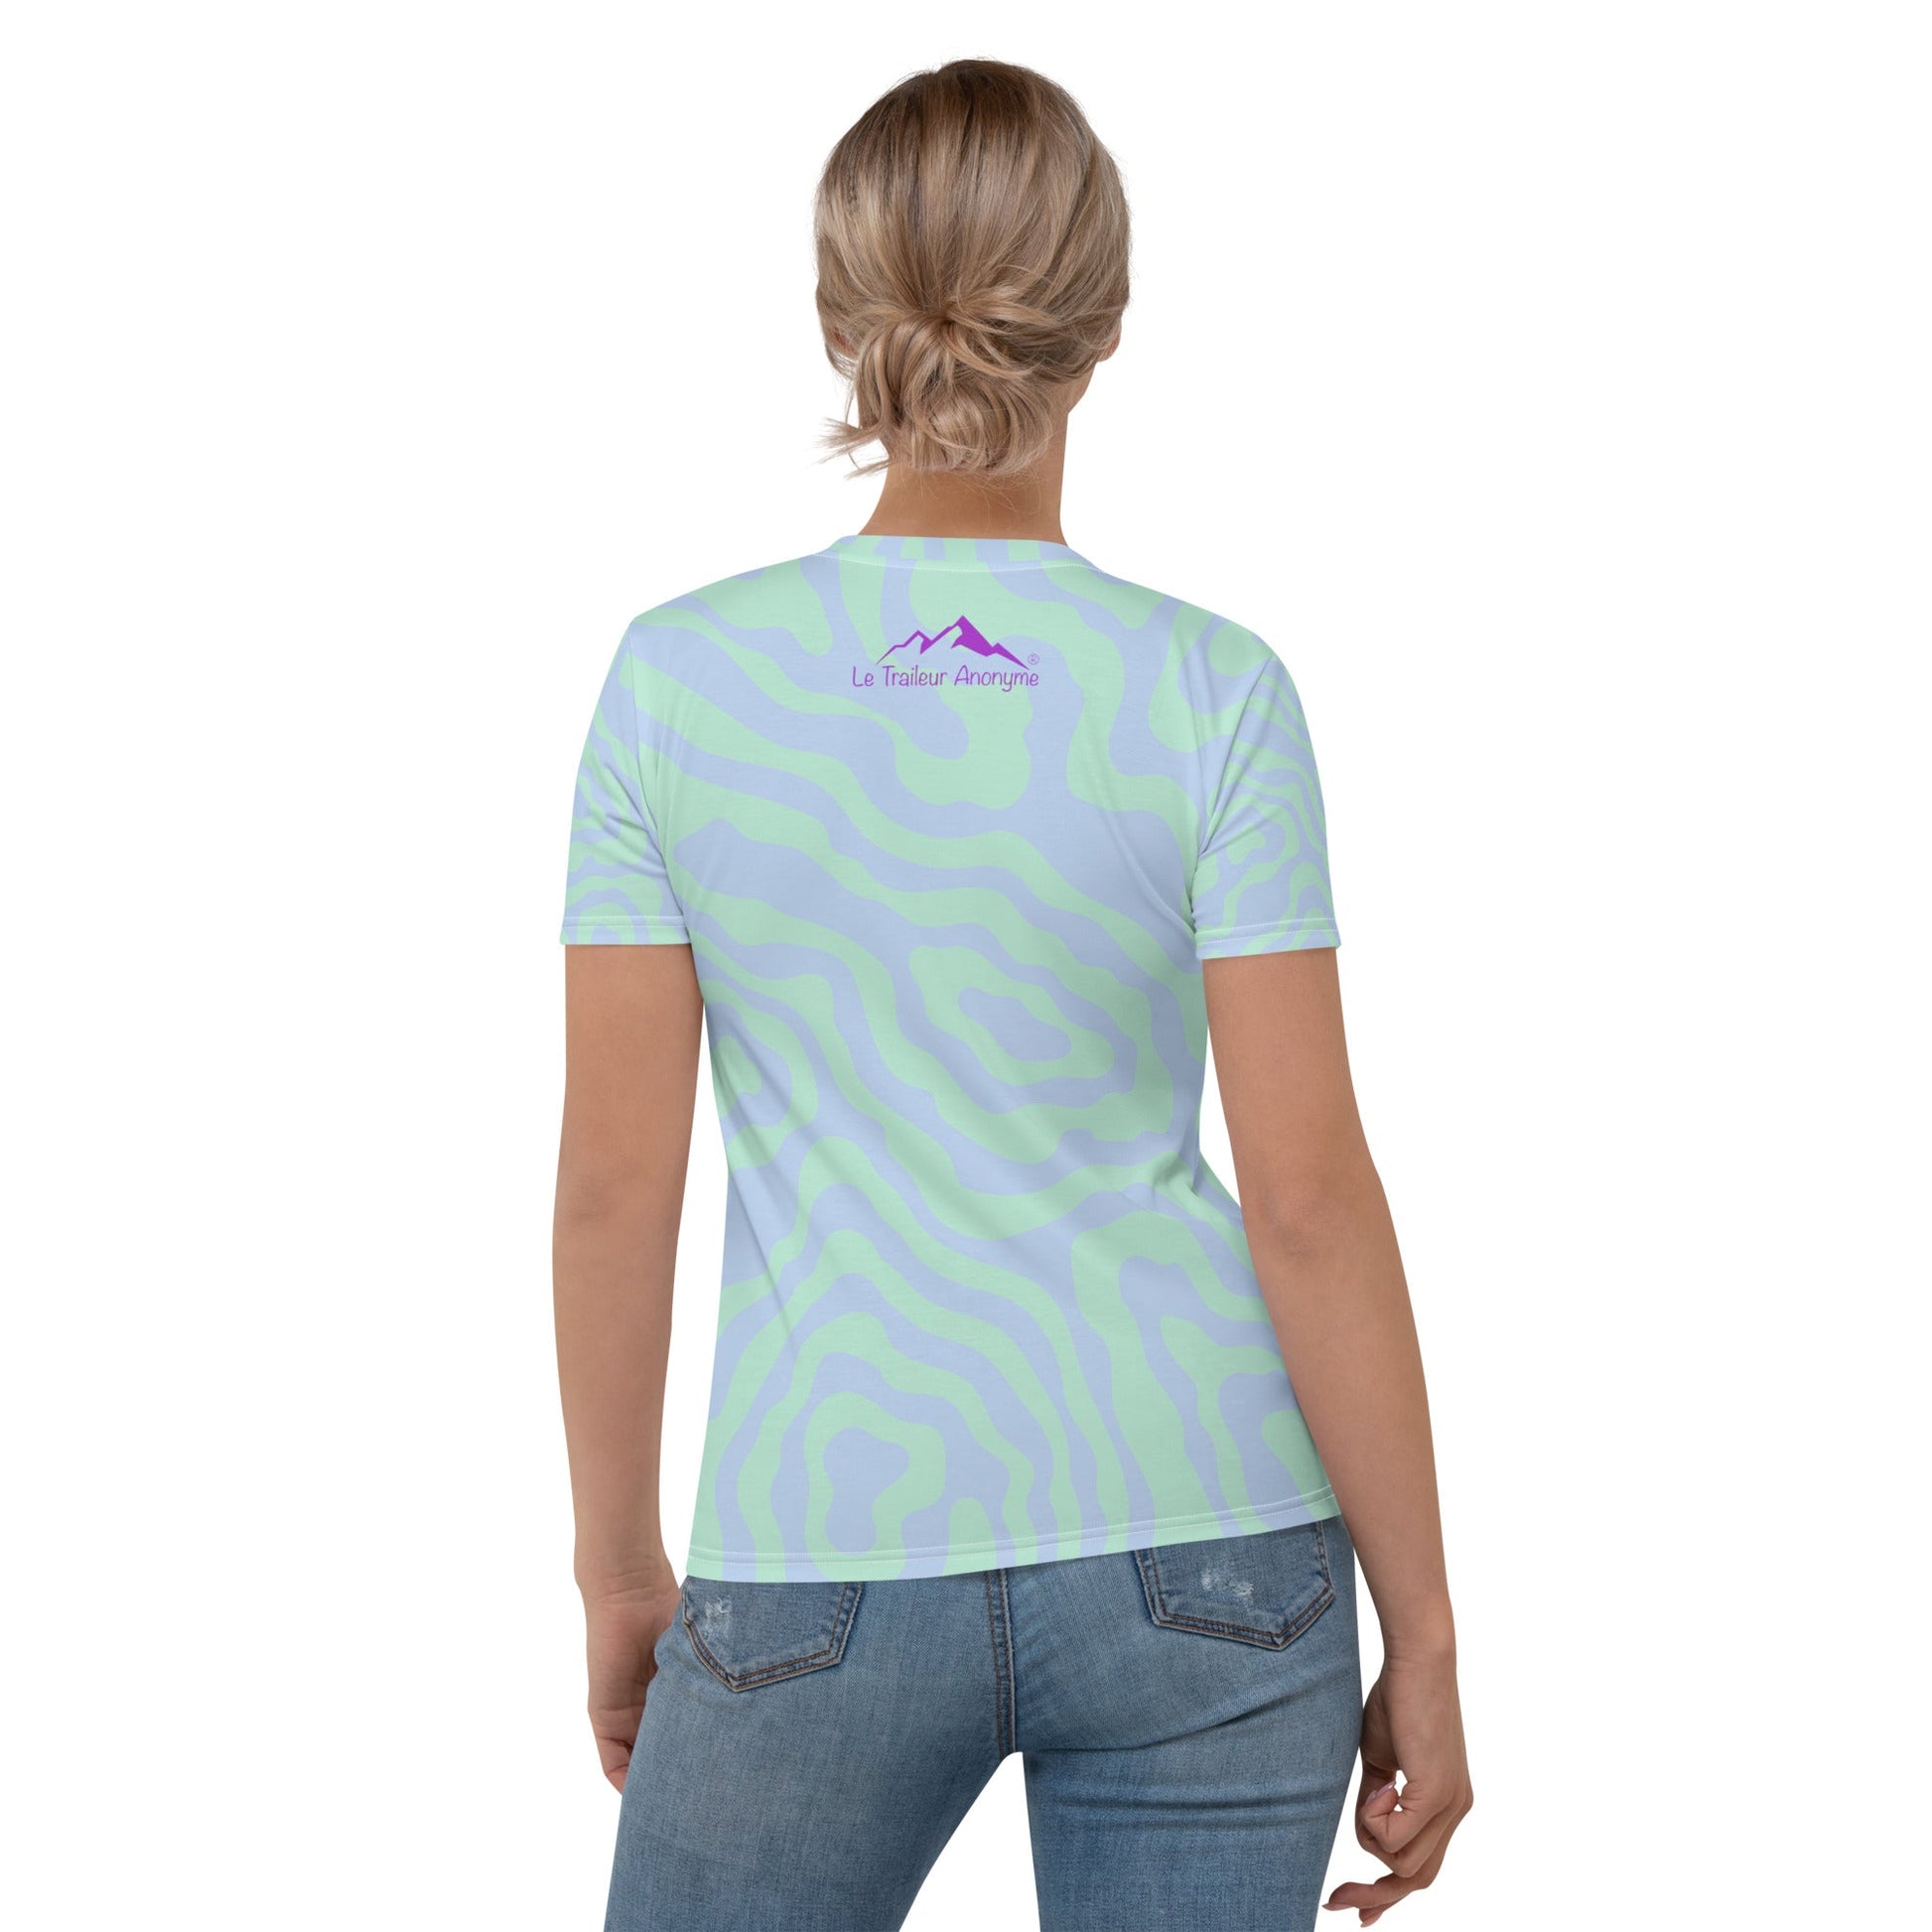 T-Shirt Running Femme - Unstoppable - Le Traileur Anonyme